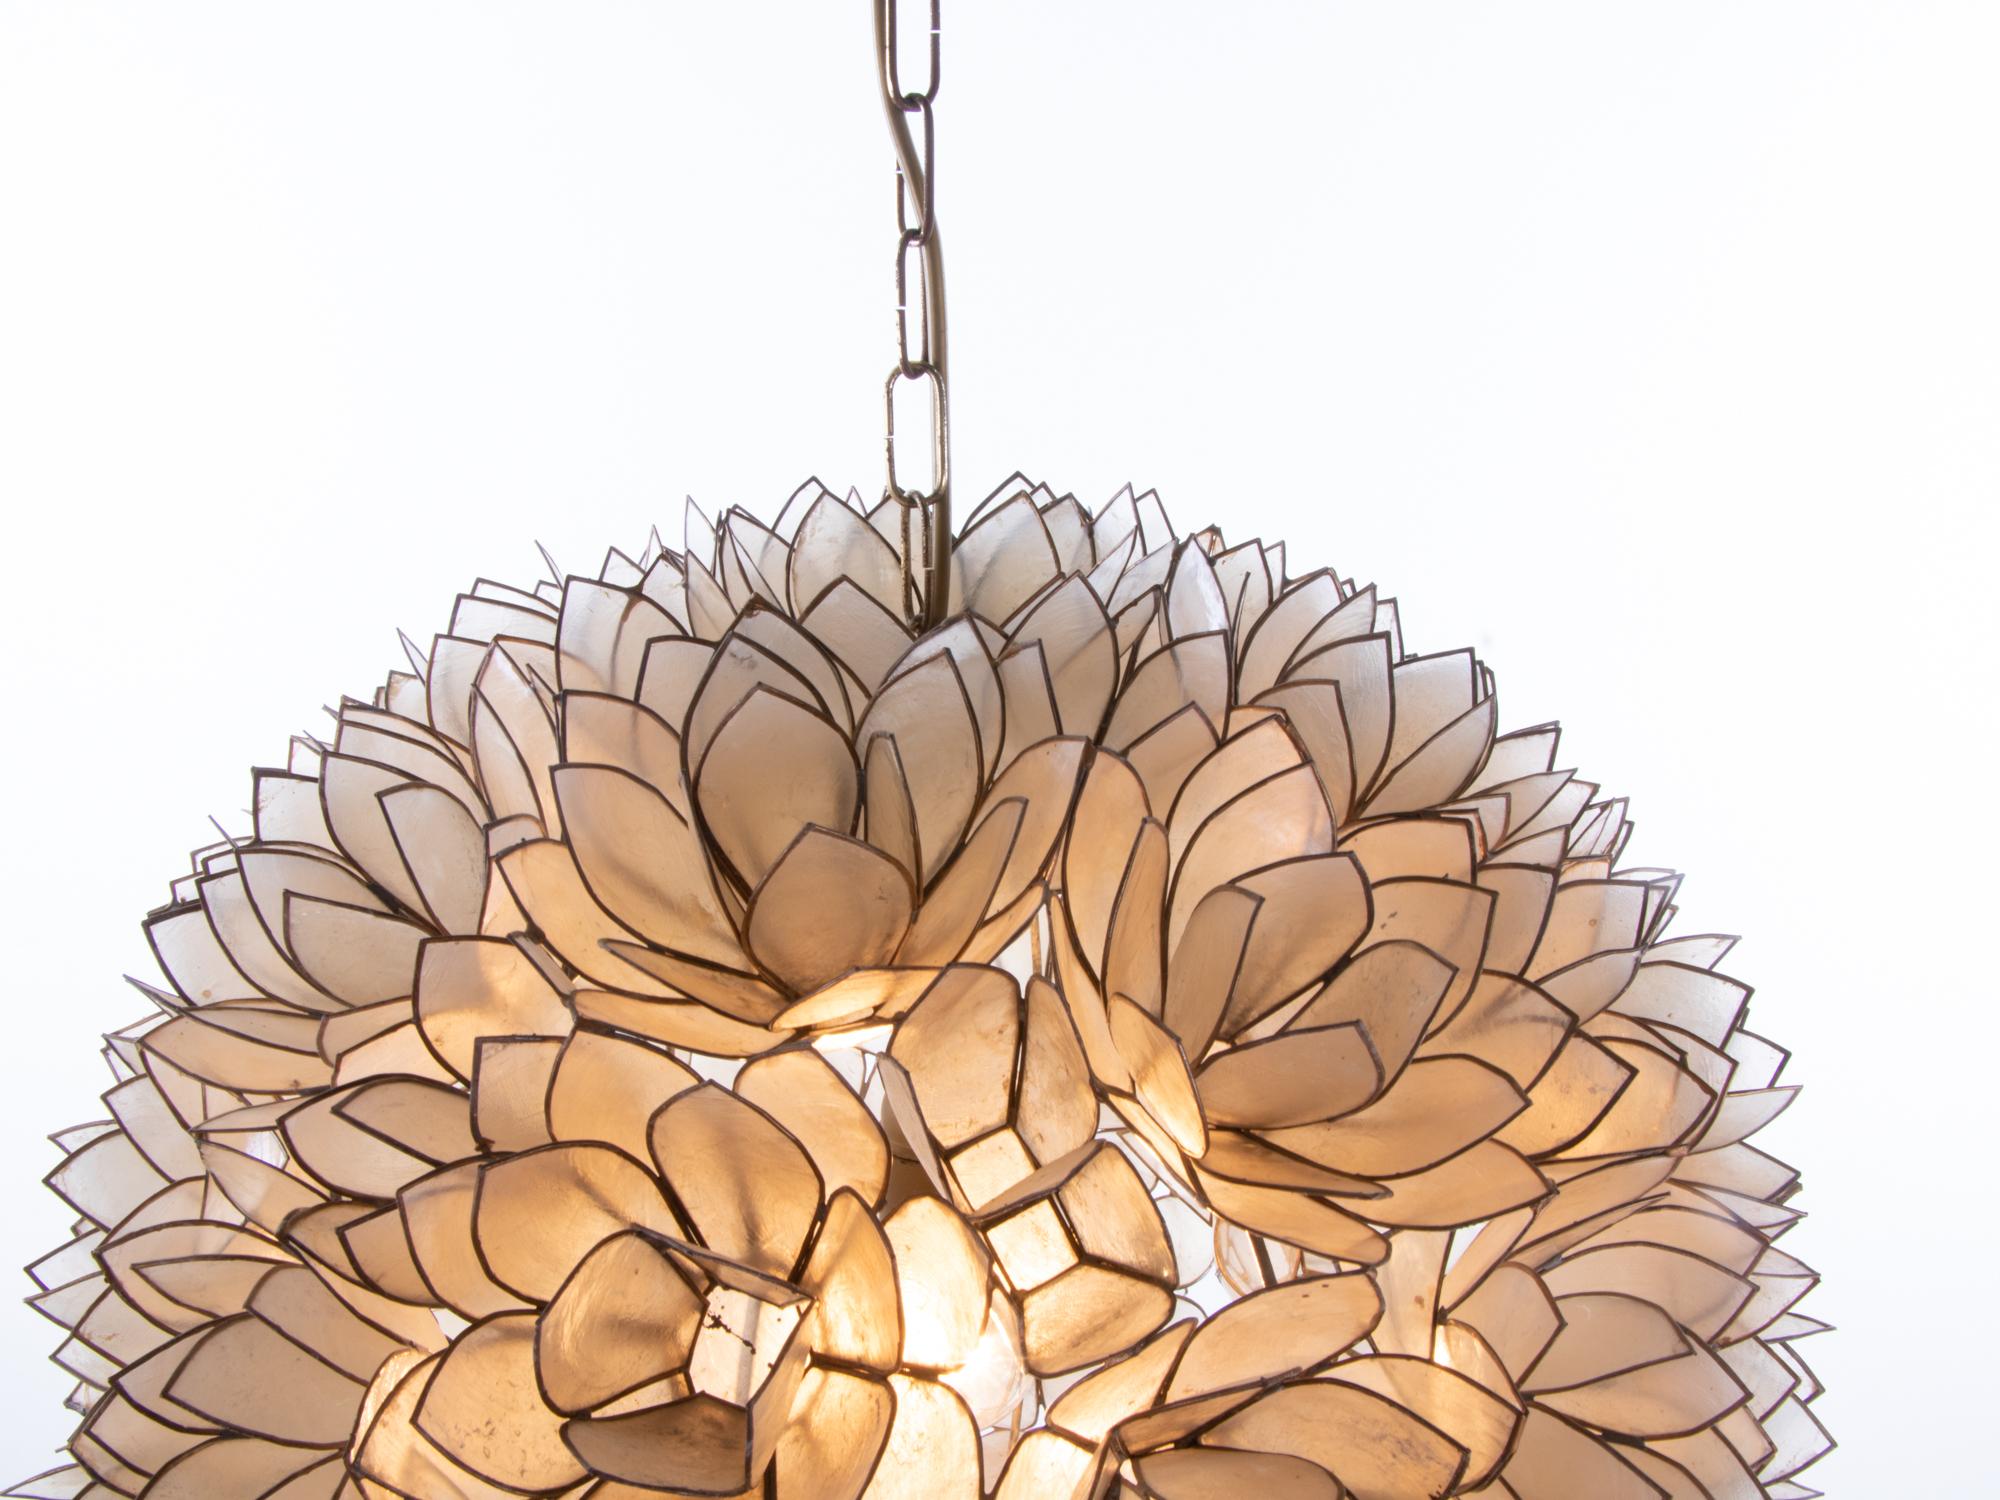 Elegant large globular art-glass lotus ball pendant light made in the 1960s. Each glass was handcrafted and assembled in a lotus flower pattern. 

Measures: diameter 19.7” (50 cm), height 51